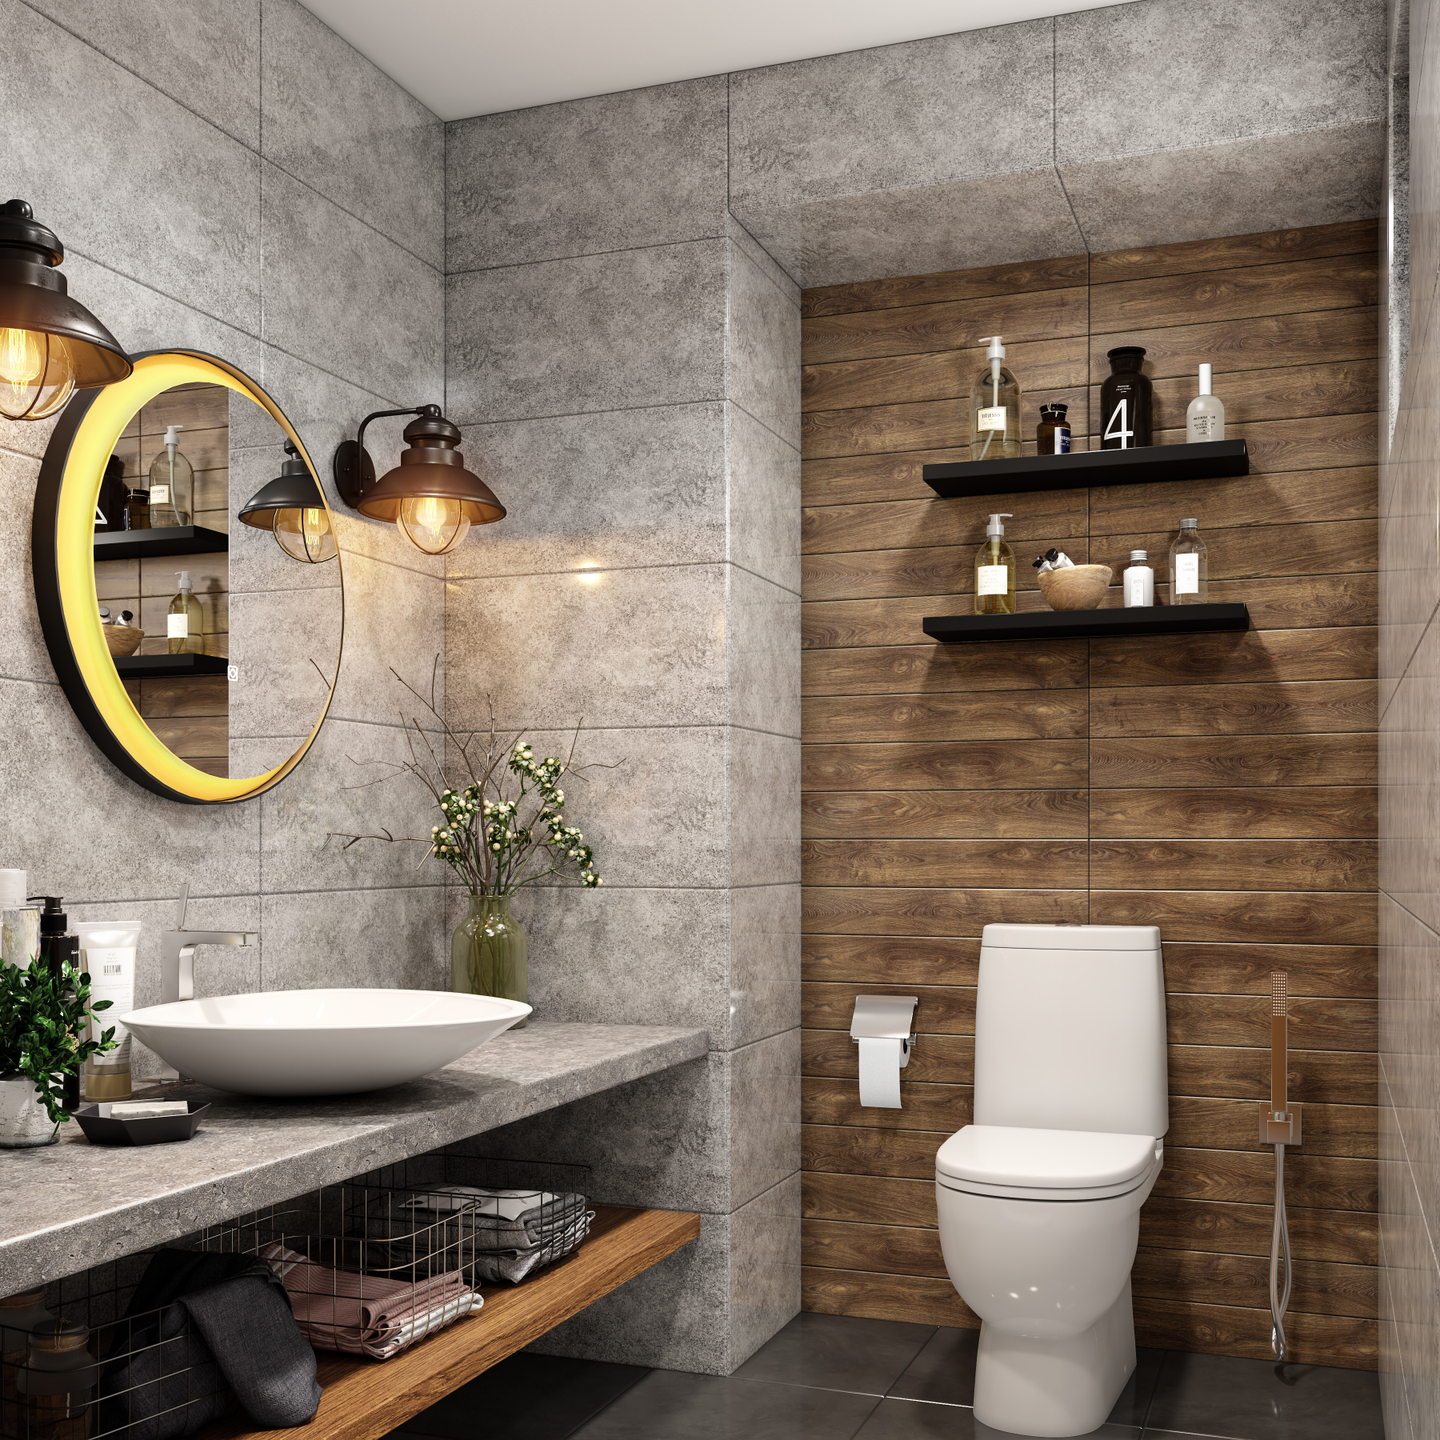 Easy To Maintain Bathroom Design With Rustic Interiors - Livspace